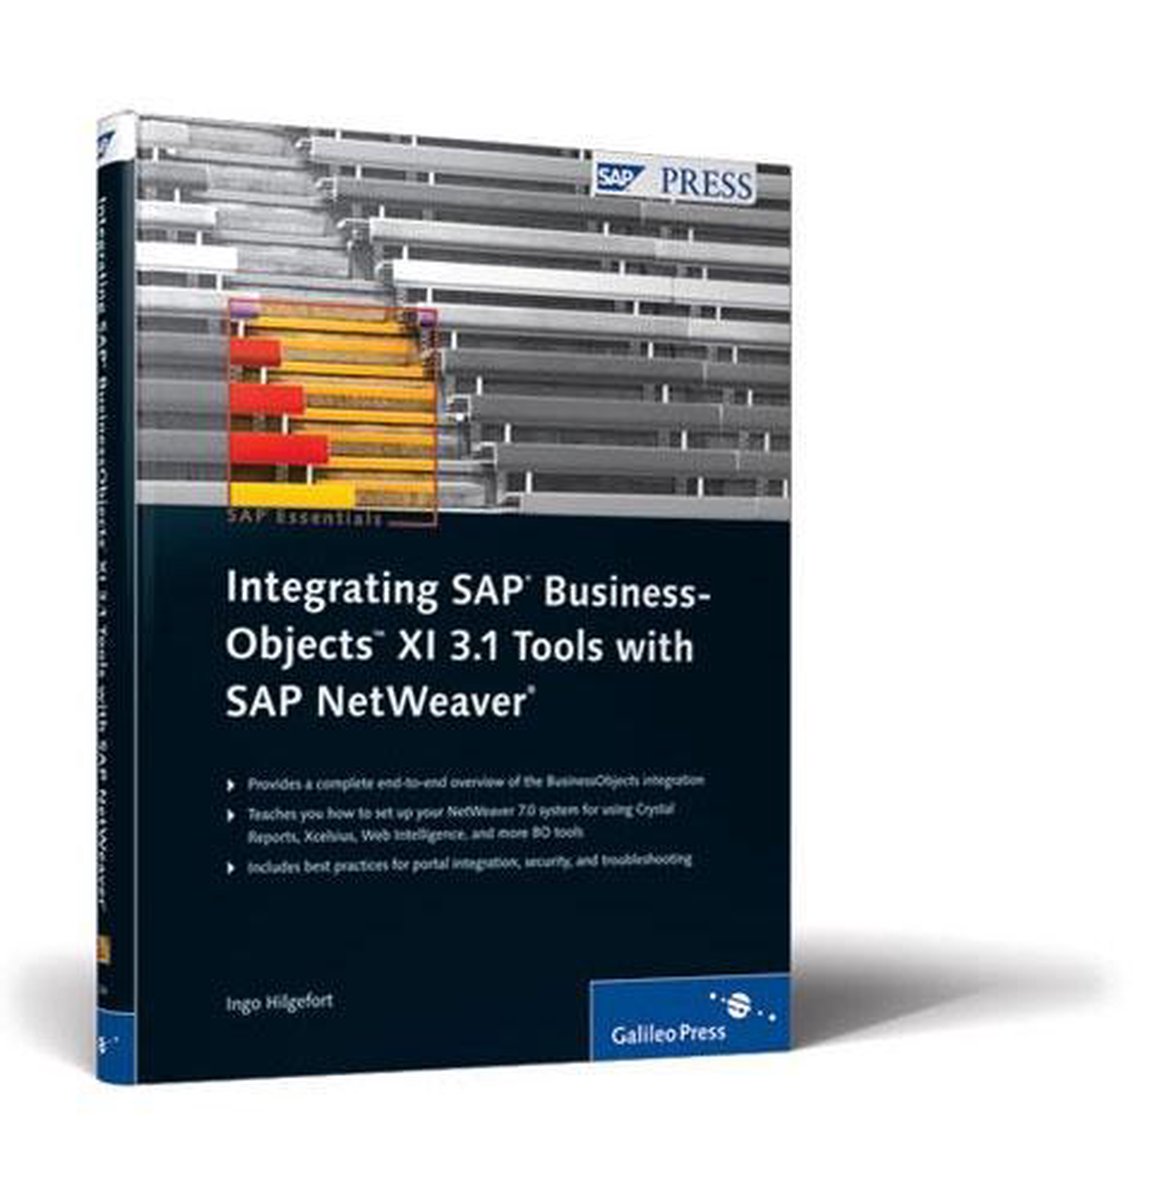 Integrating SAP Business-objects XI 3.1 Tools with SAP NetWeaver